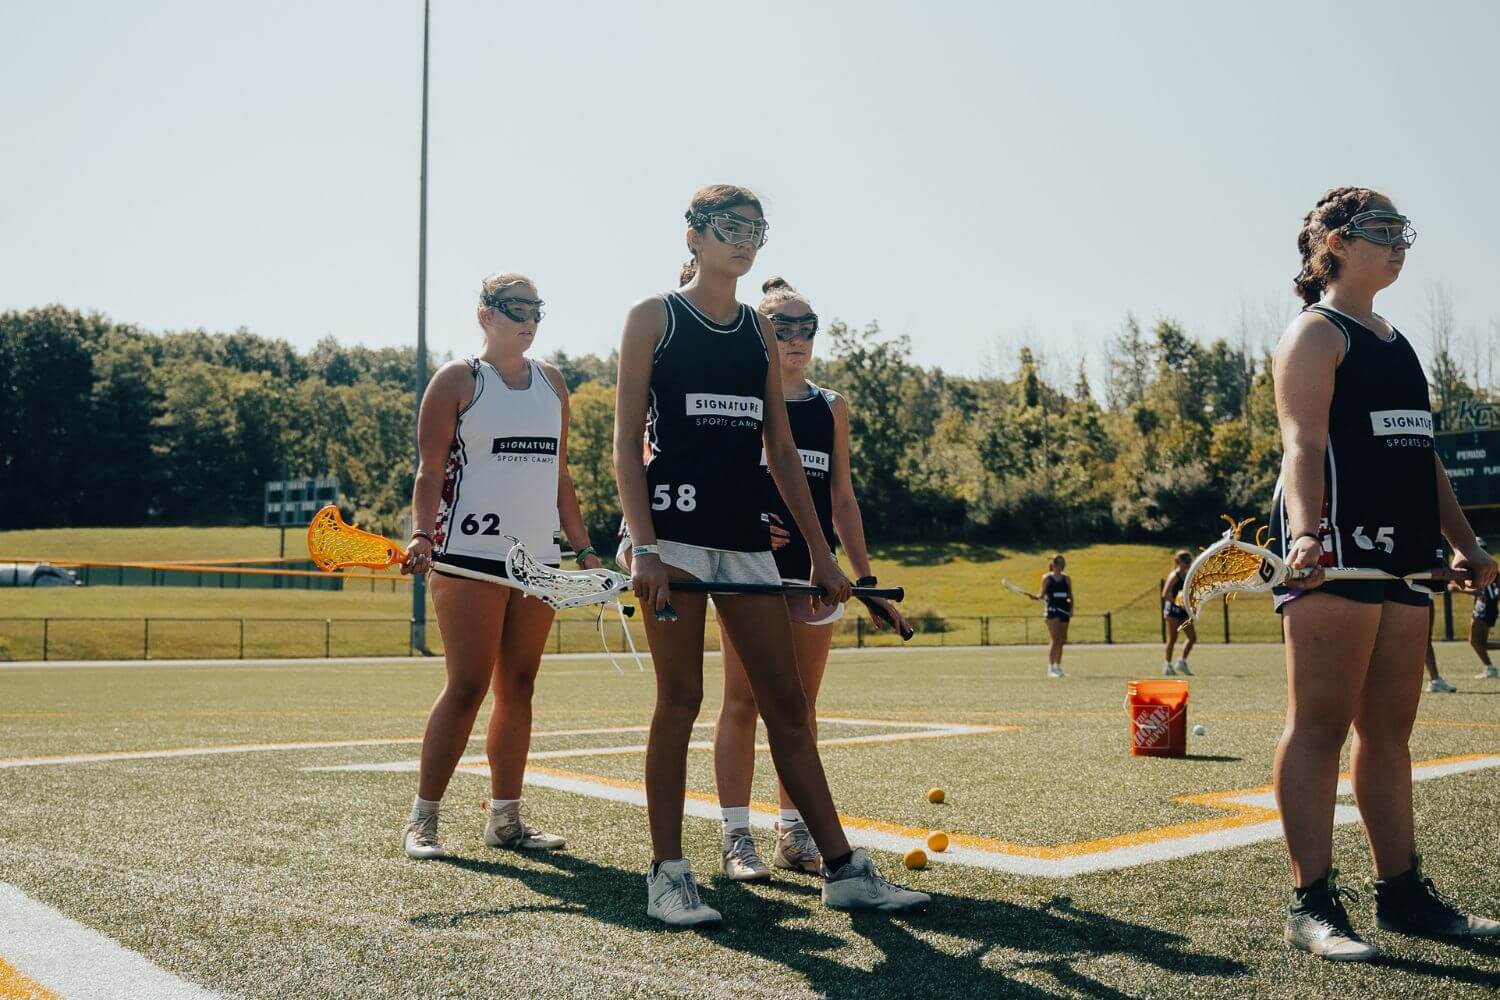 A group of female lacrosse players standing together during practice